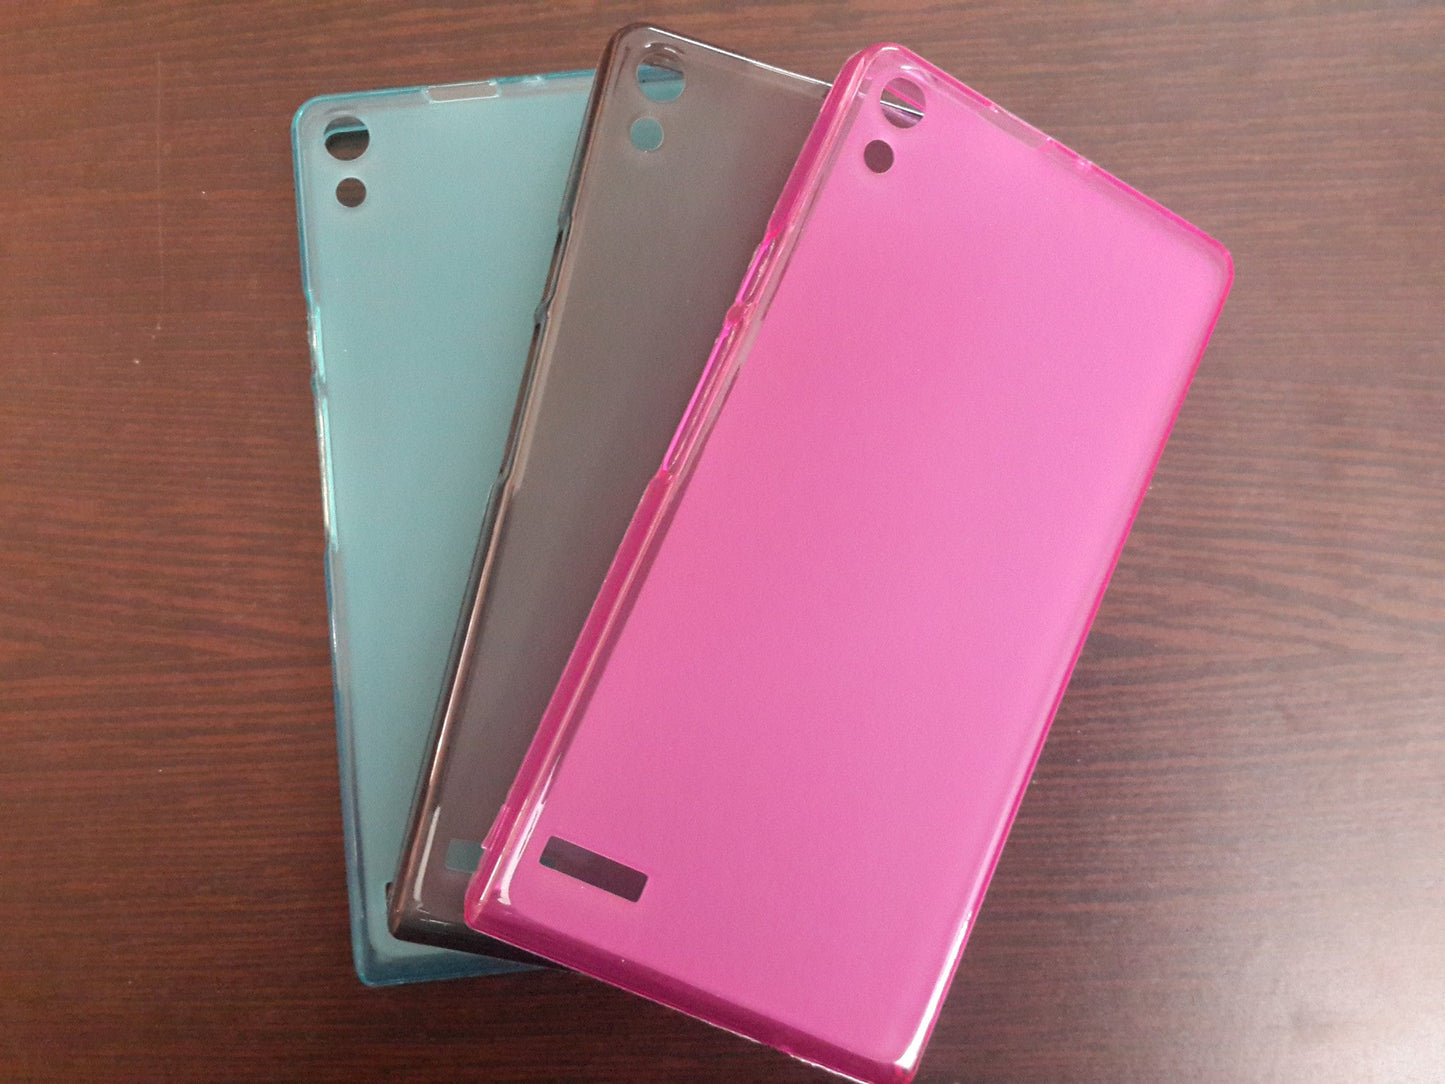 Huawei Ascend P6 Case Cover TPU - buy-online